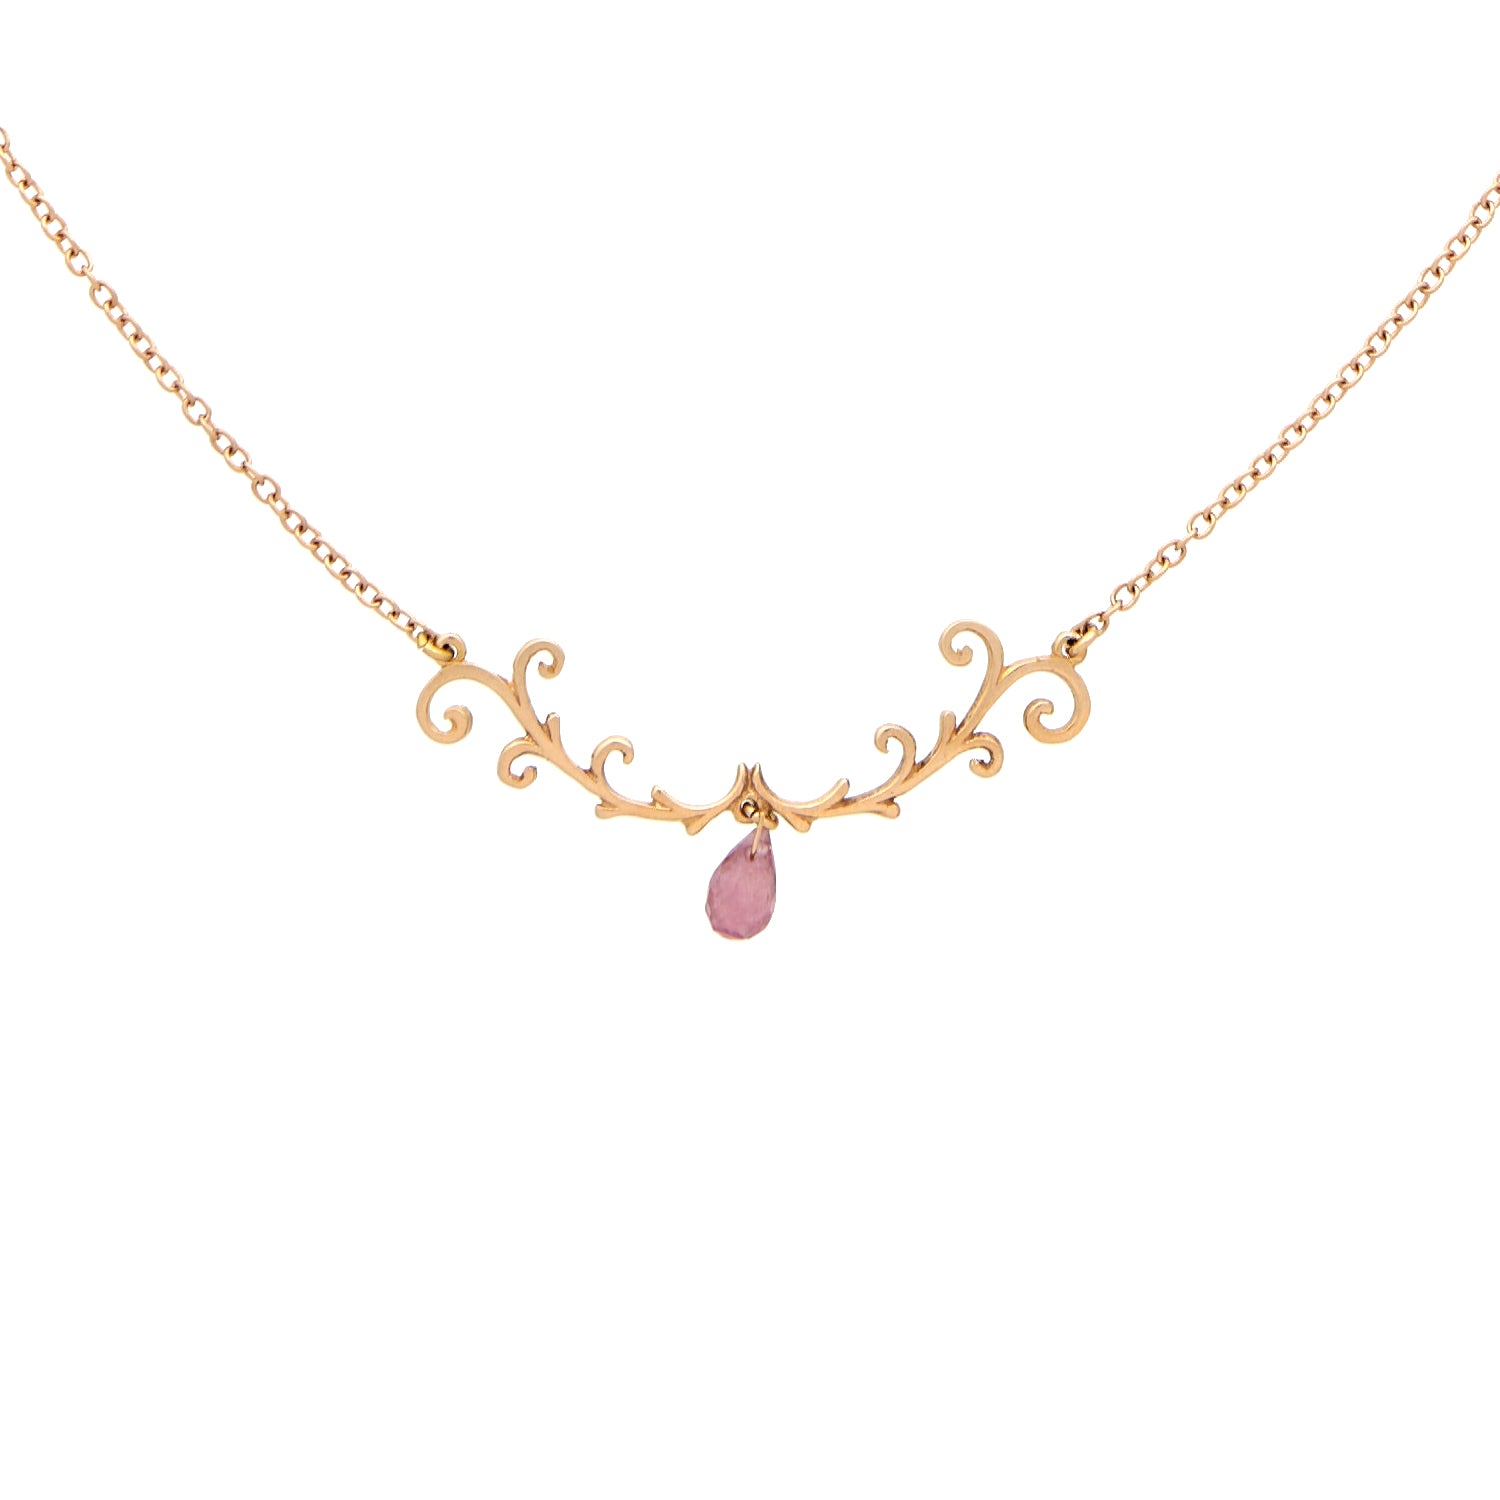 ROSE GOLD NECKLACE WITH TOURMALINE